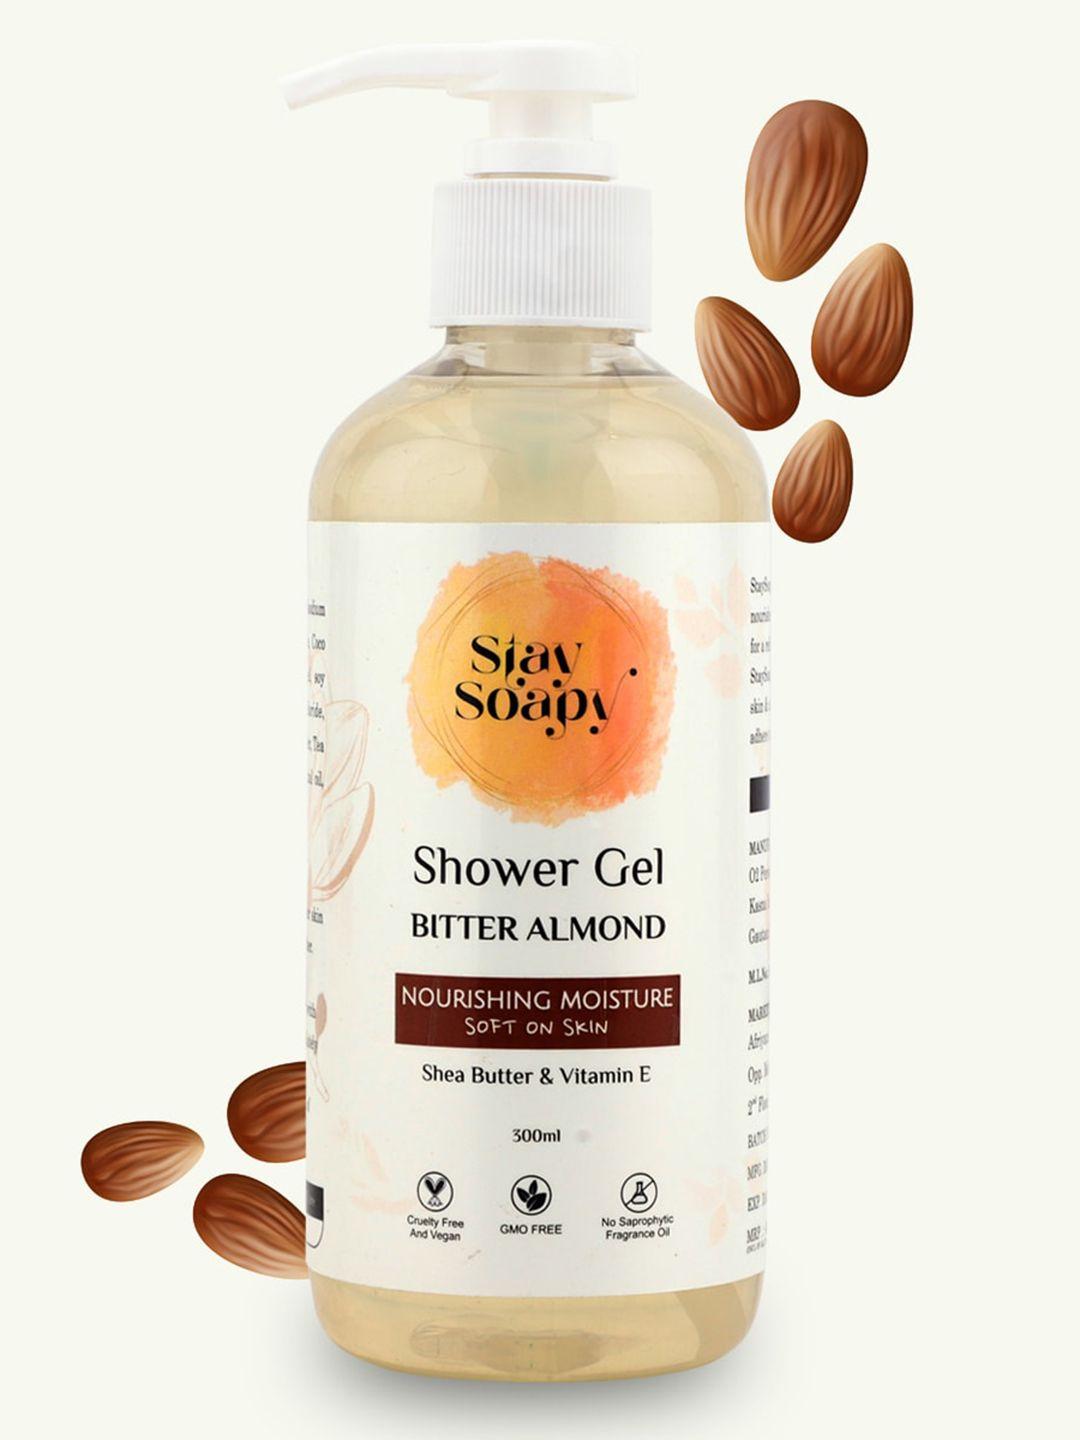 stay soapy set of 5 bitter almond with shea butter & vitamin e shower gel 300ml each